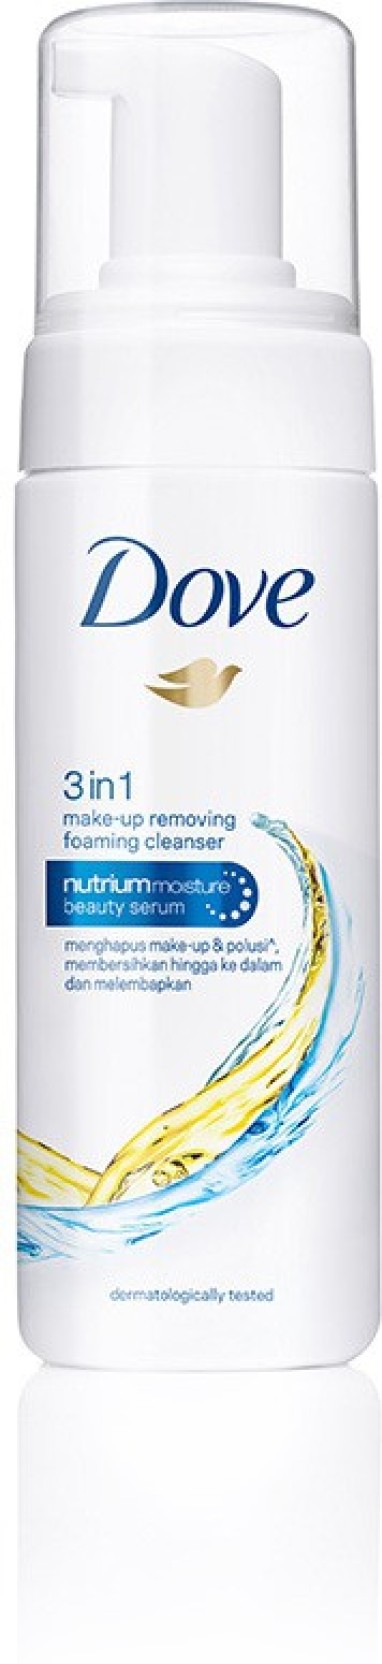 Dove 3 In 1 Make Up Removing Foaming Cleanser Price In India